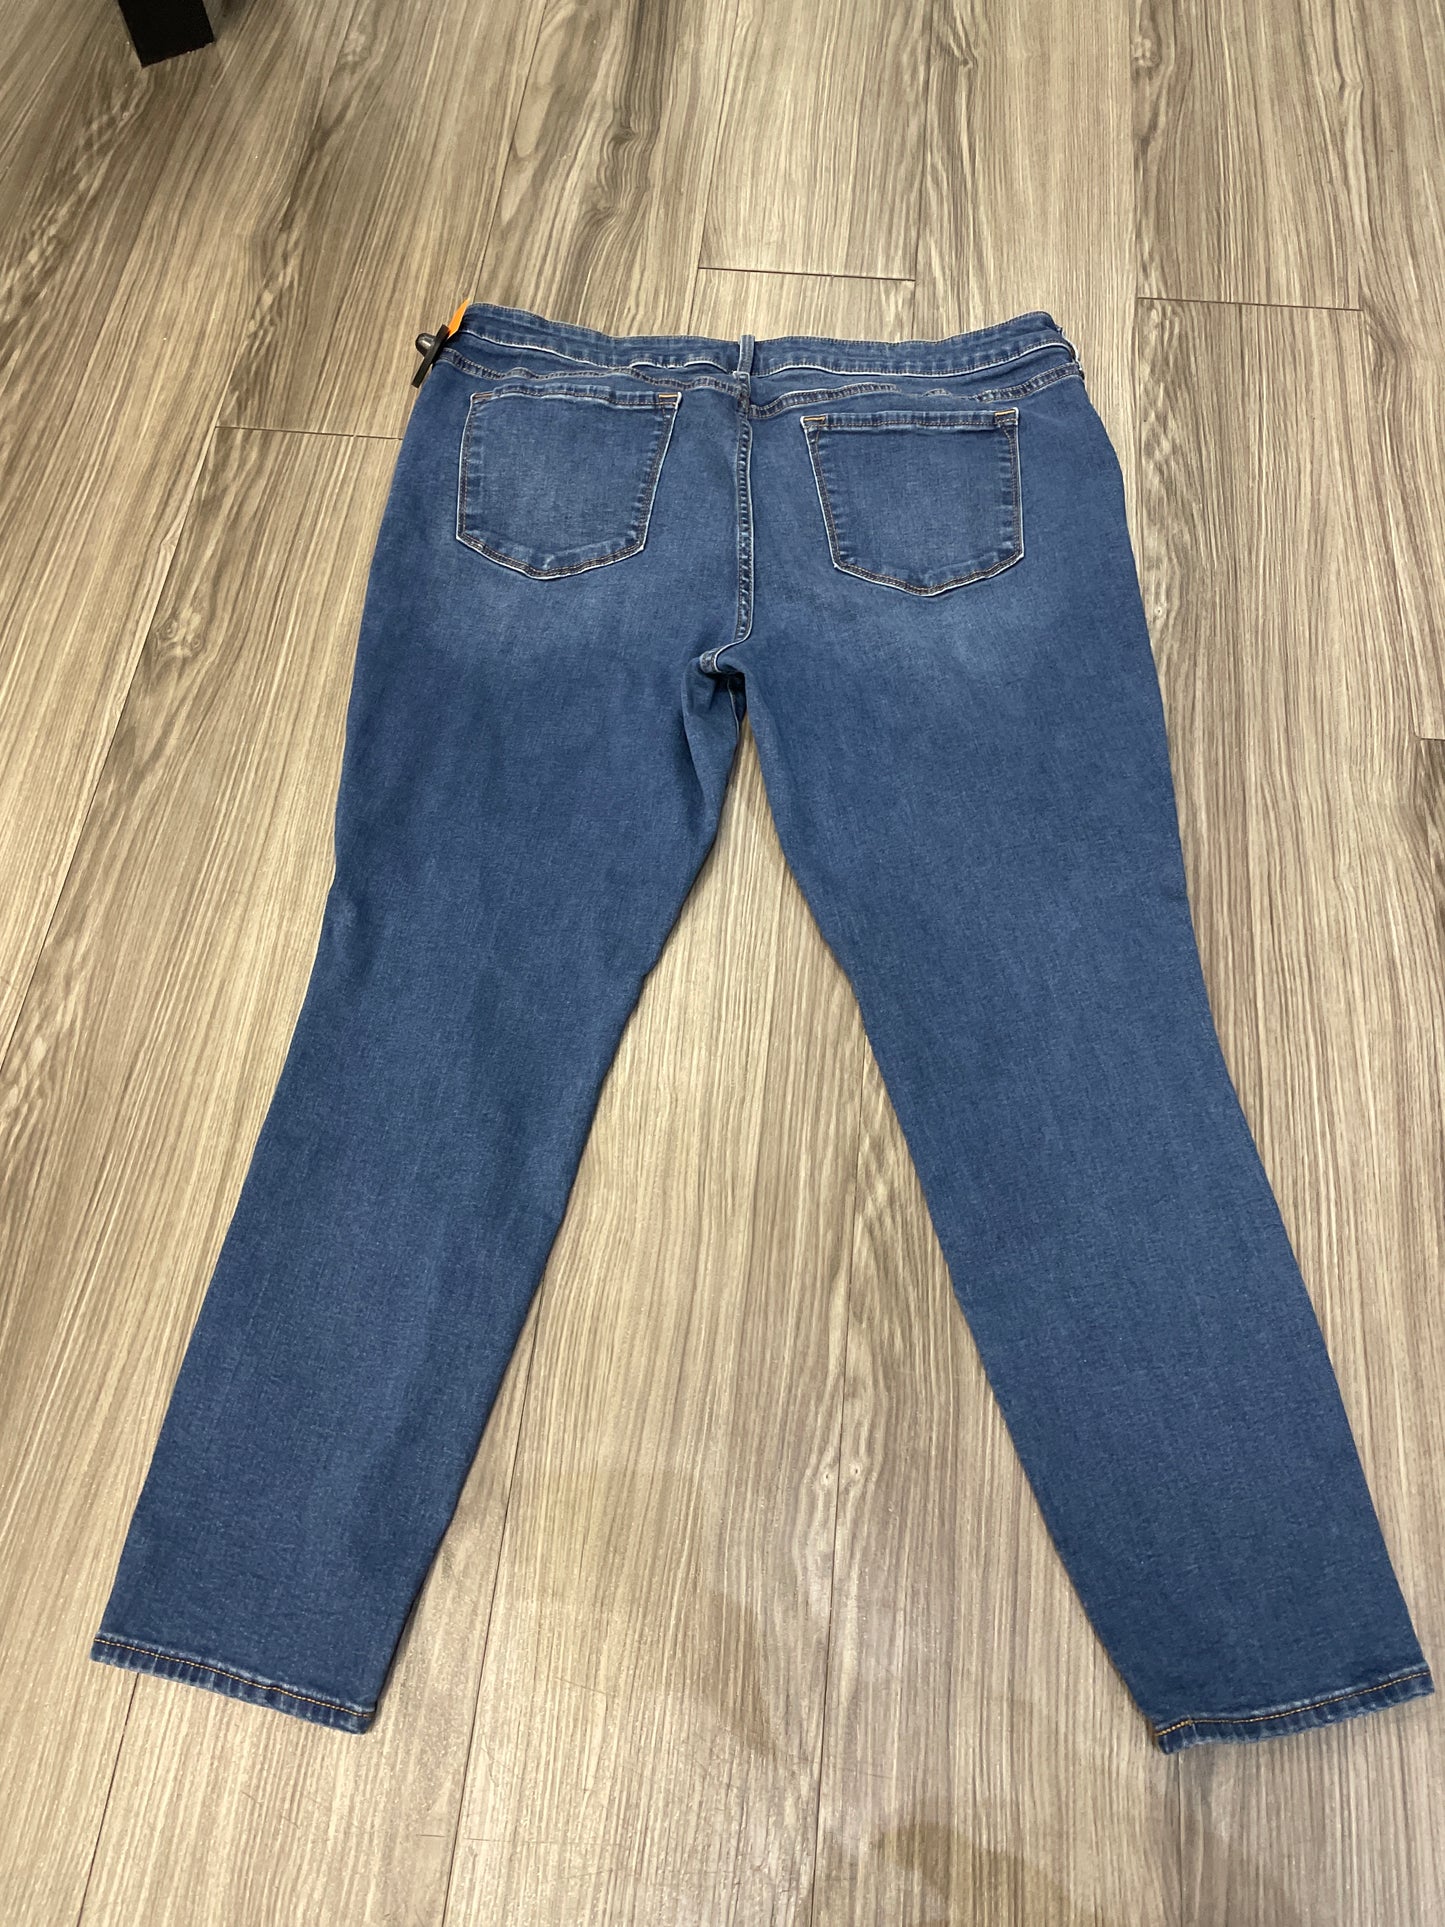 Jeans Skinny By Old Navy  Size: 20